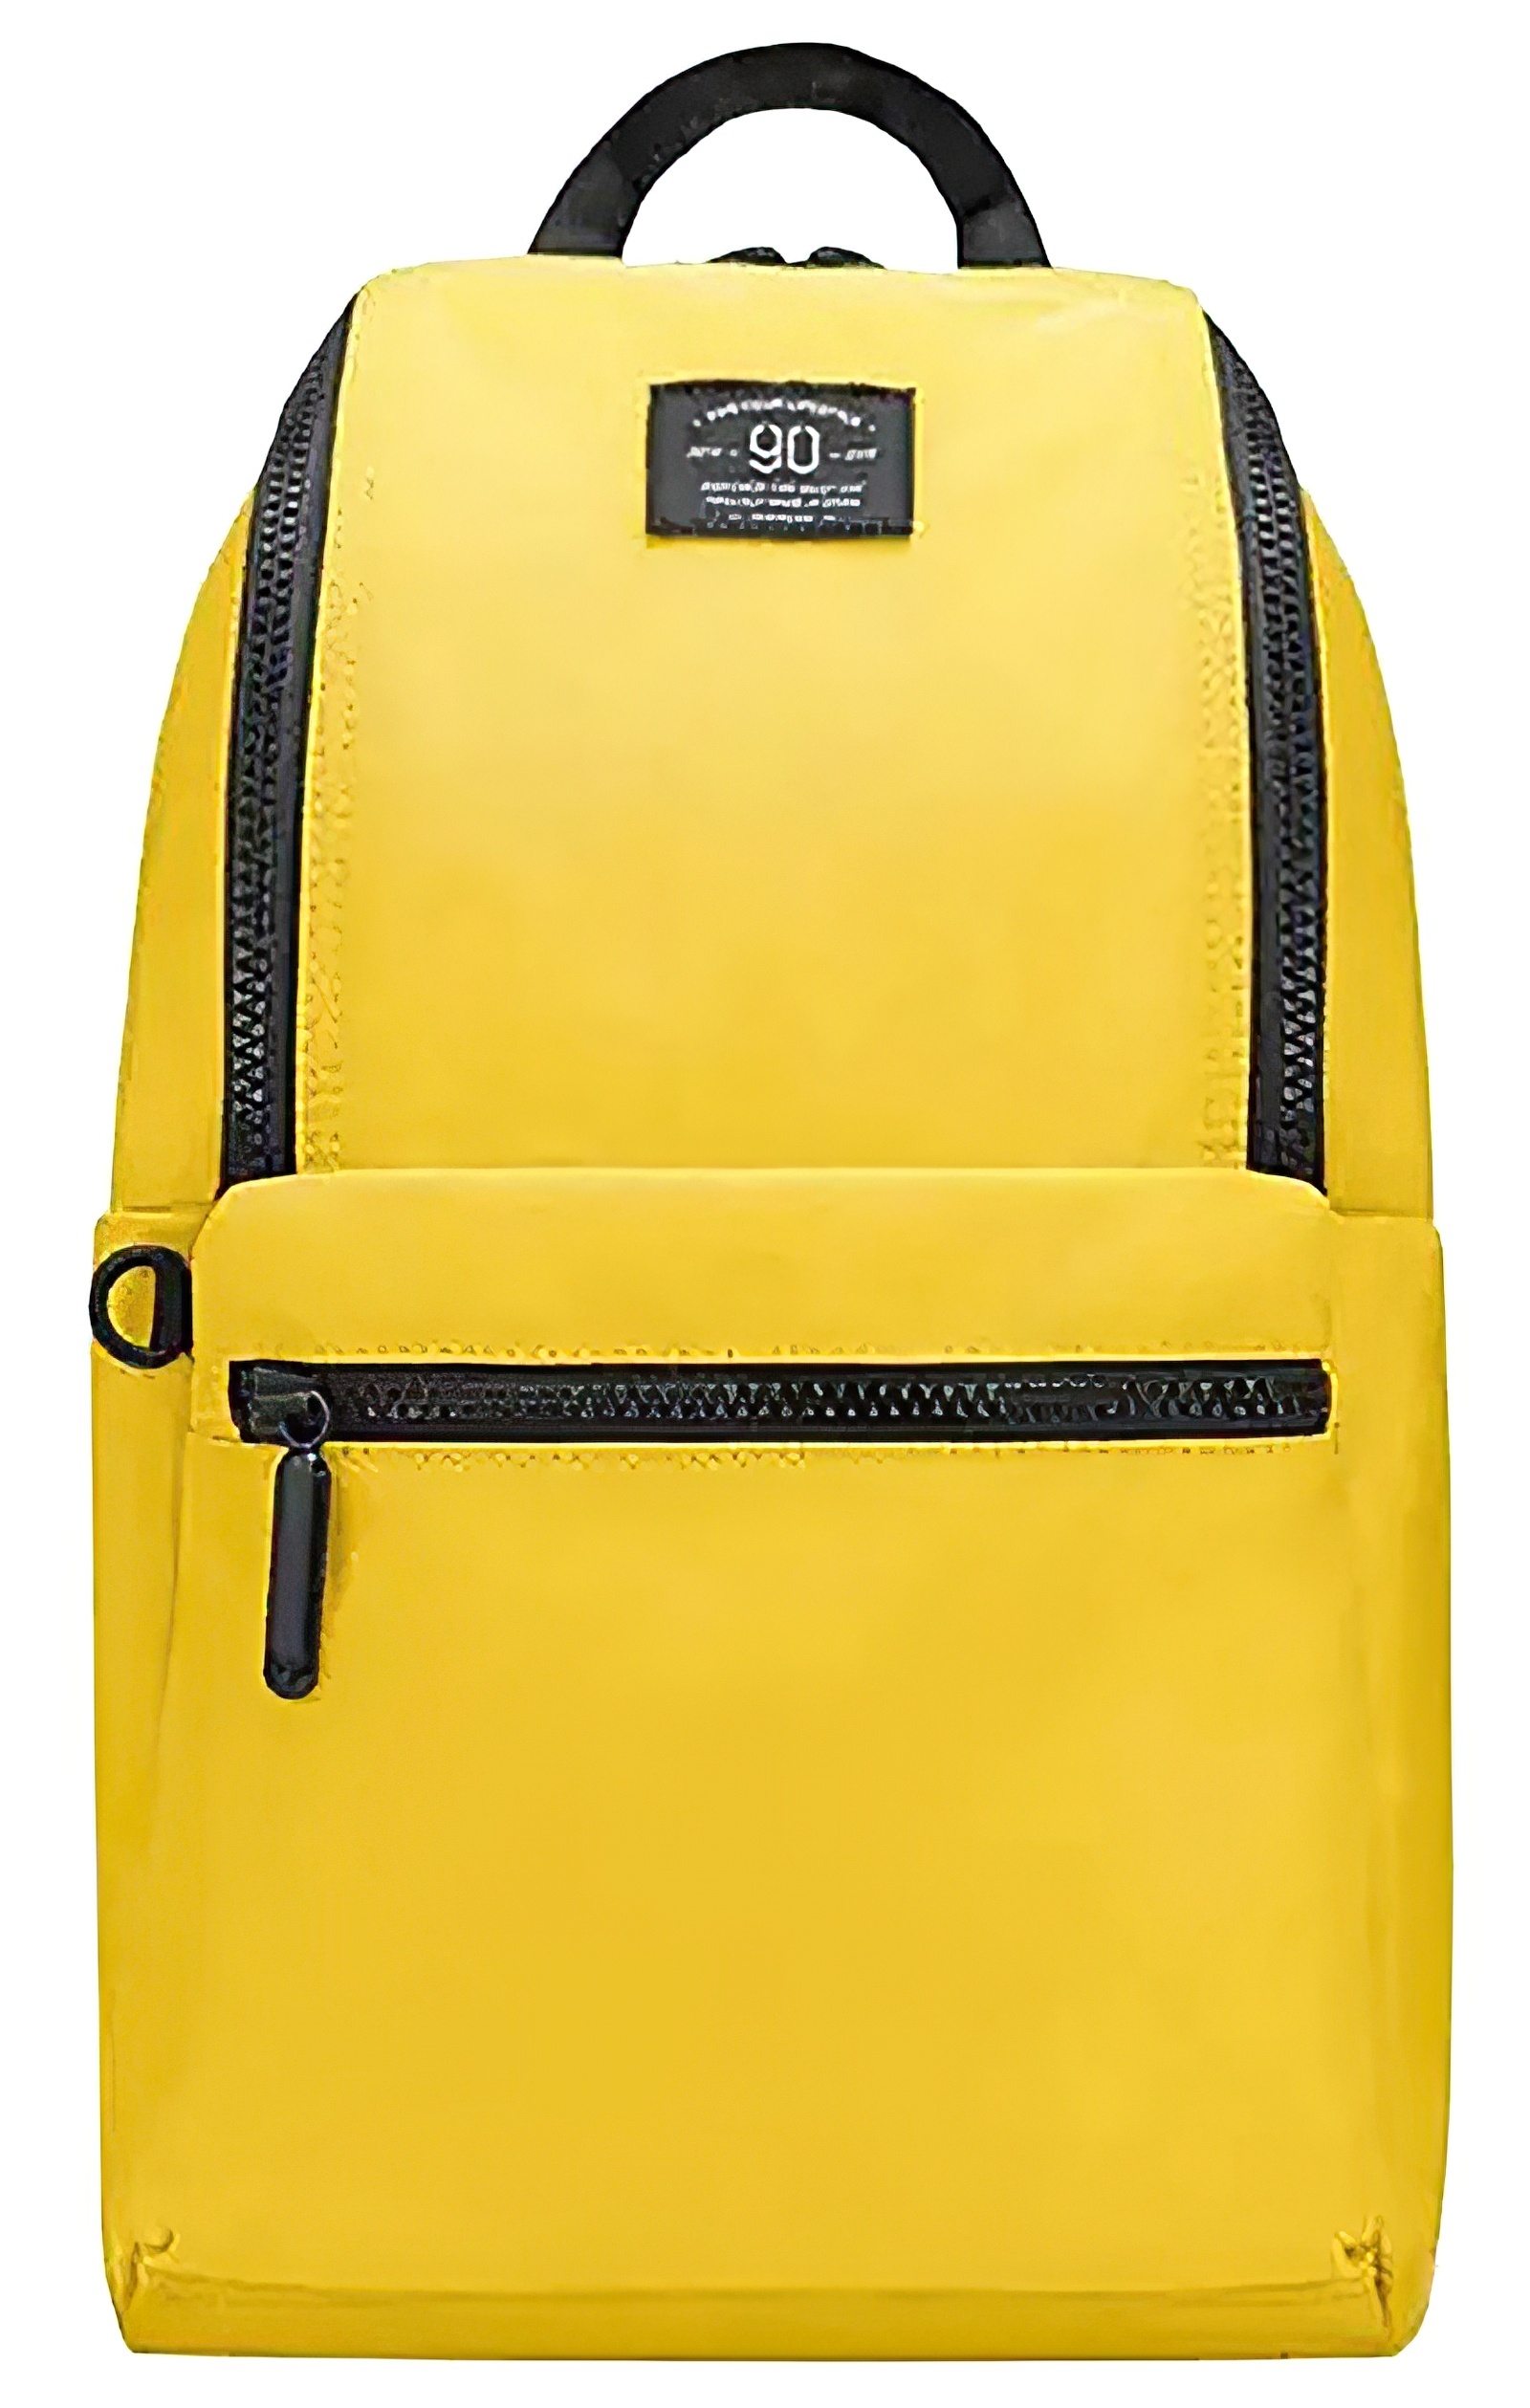 Xiaomi 90 Points Pro Leisure Travel Backpack 18L Yellow КАРКАМ - фото 1